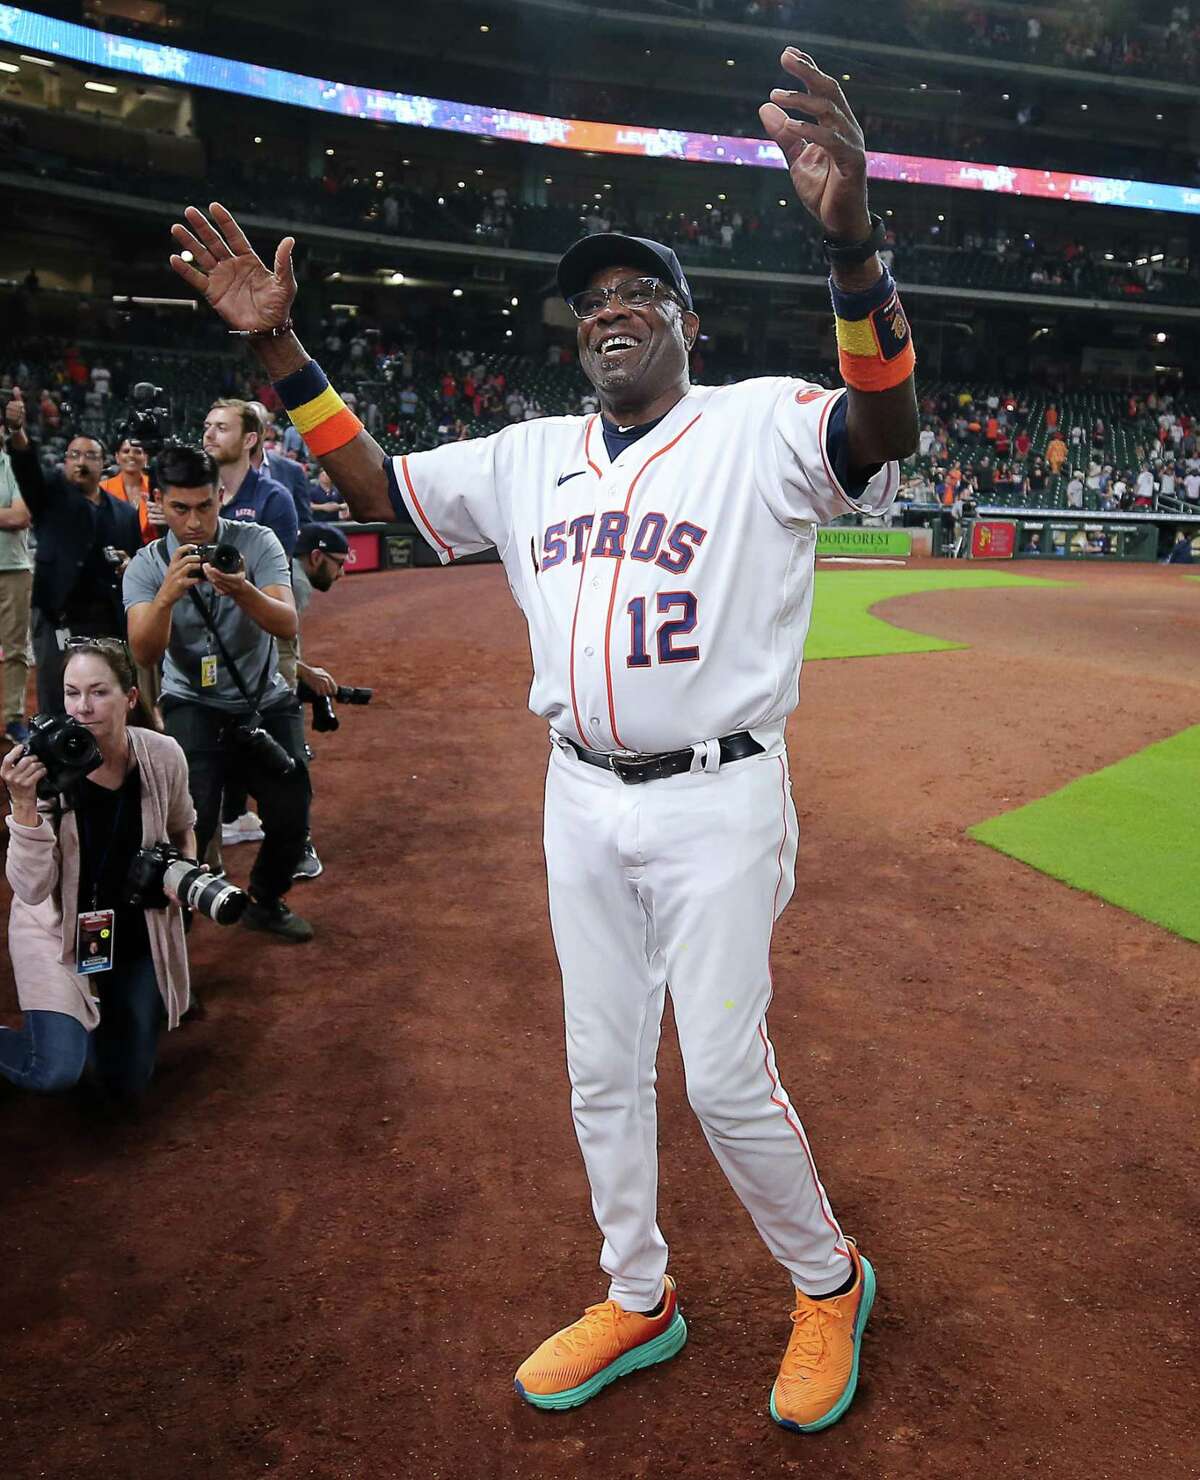 HOUSTON, TEXAS - MAY 03: Manager Dusty Baker Jr. #12 of the Houston Astros celebrates his 2000th career win after a game against Seattle Mariners at Minute Maid Park on May 03, 2022 in Houston, Texas. (Photo by Bob Levey/Getty Images)